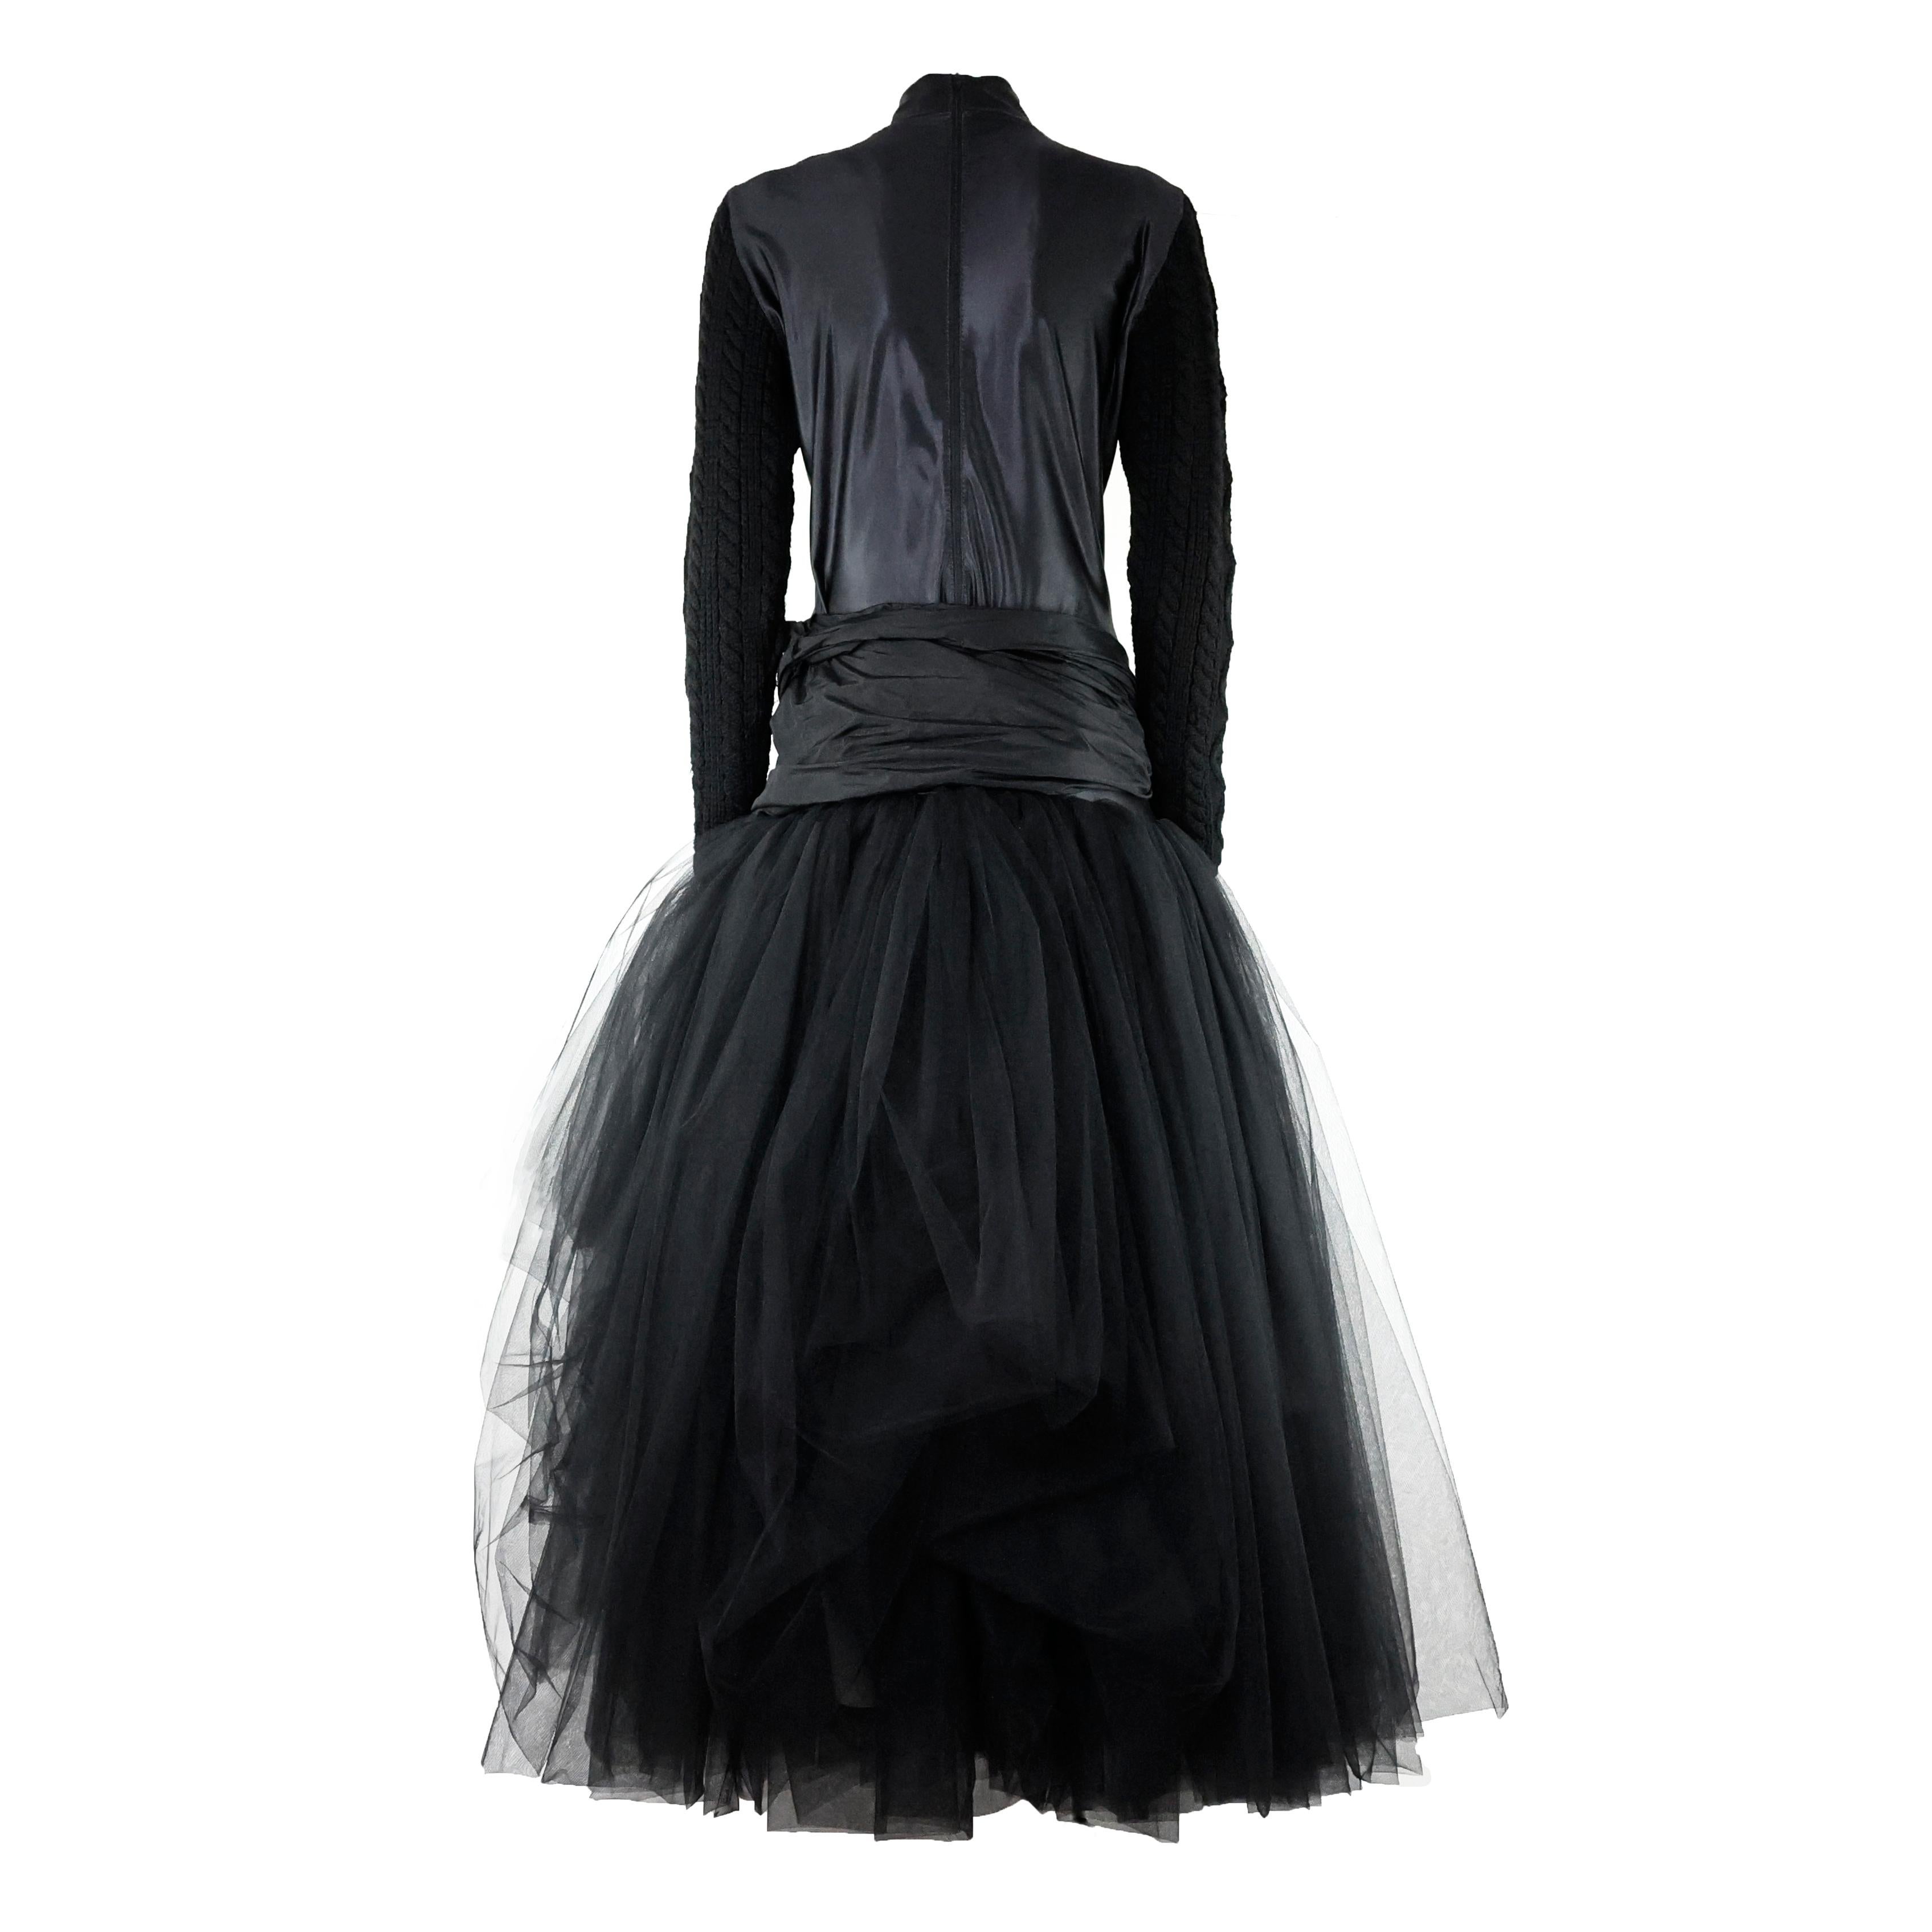 Museum-Worthy 1980s Jean Paul Gaultier Pour Equator Maxi black Dress in lycra, with silk bow, knitted sleeves and tulle skirt. Size 44 IT.

Condition:
Overall really good, some imperfections on tulle.
